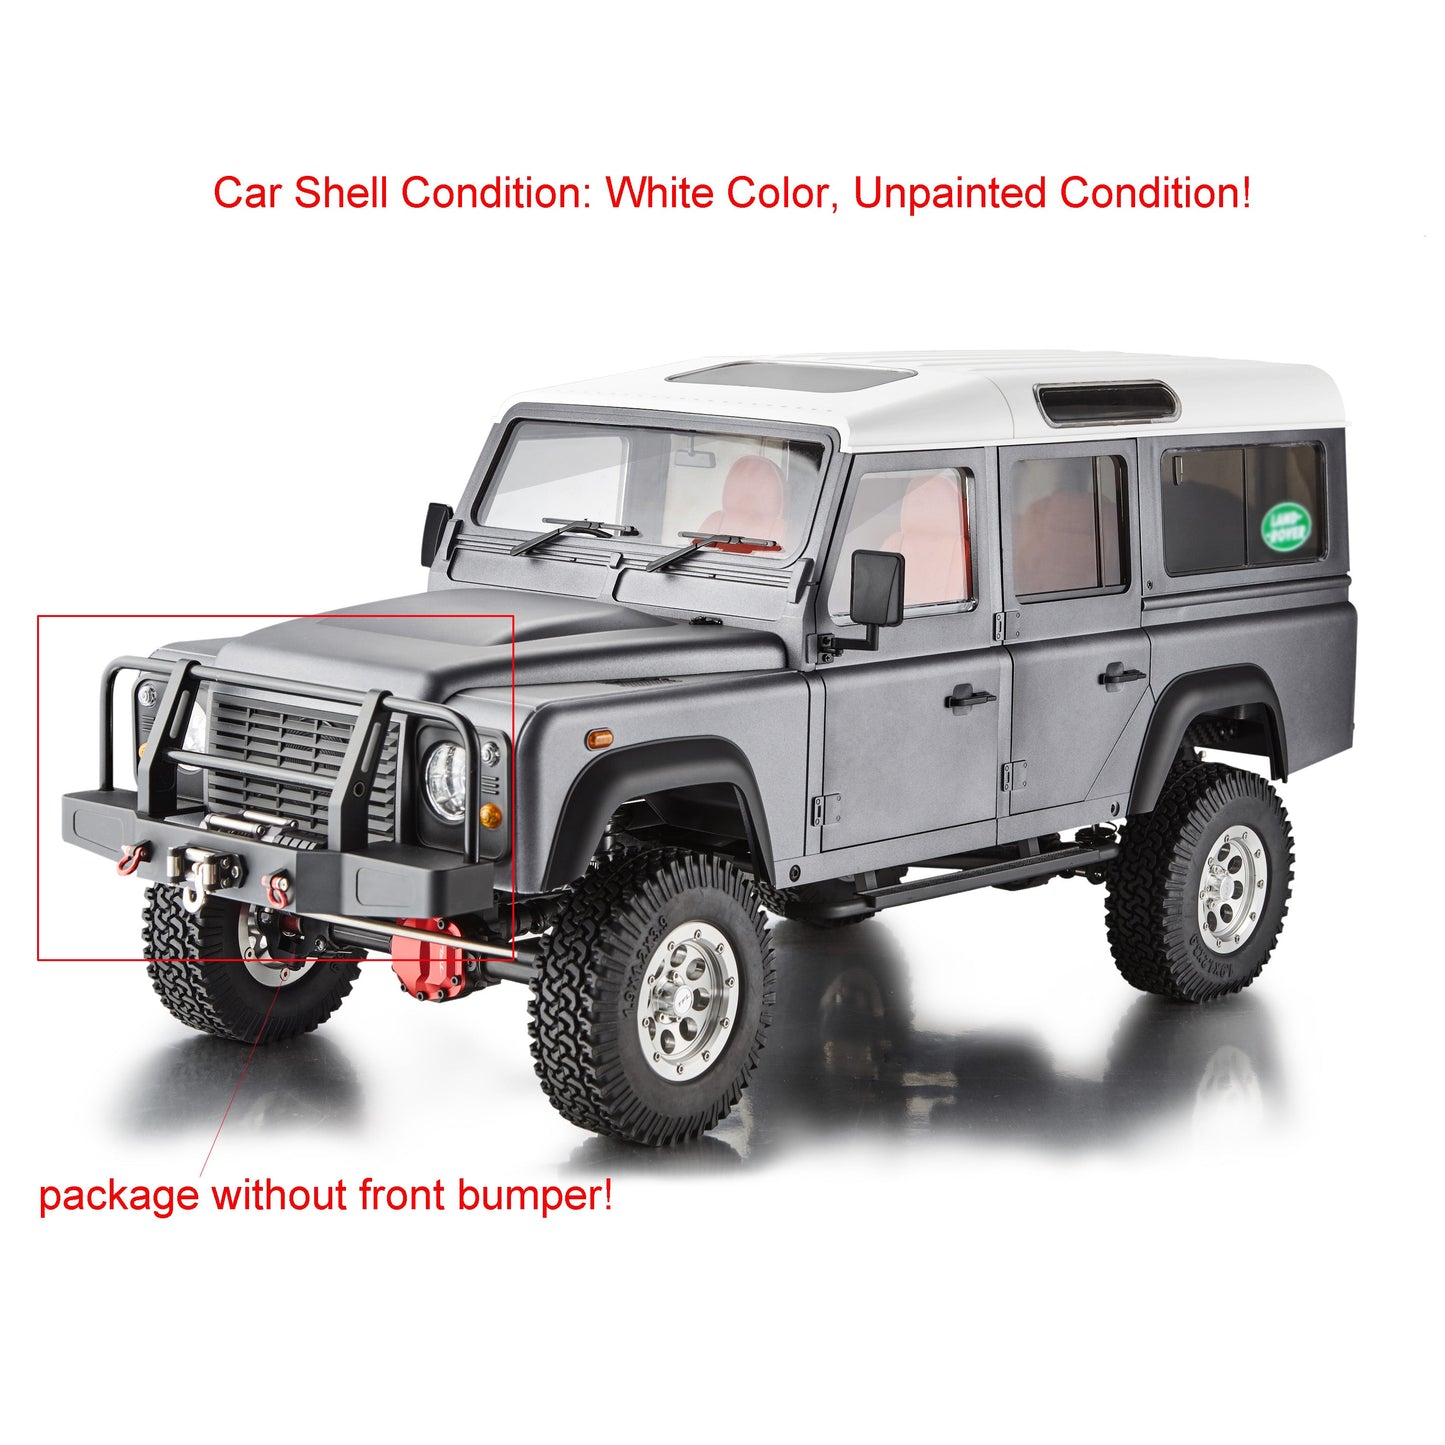 TFL 1/10 Crawler D110Radio Controlled Car 334MM Wheelbase Assembeld Chassis Shell Body KIT Model W/O Electronic Parts for Lan Rovar